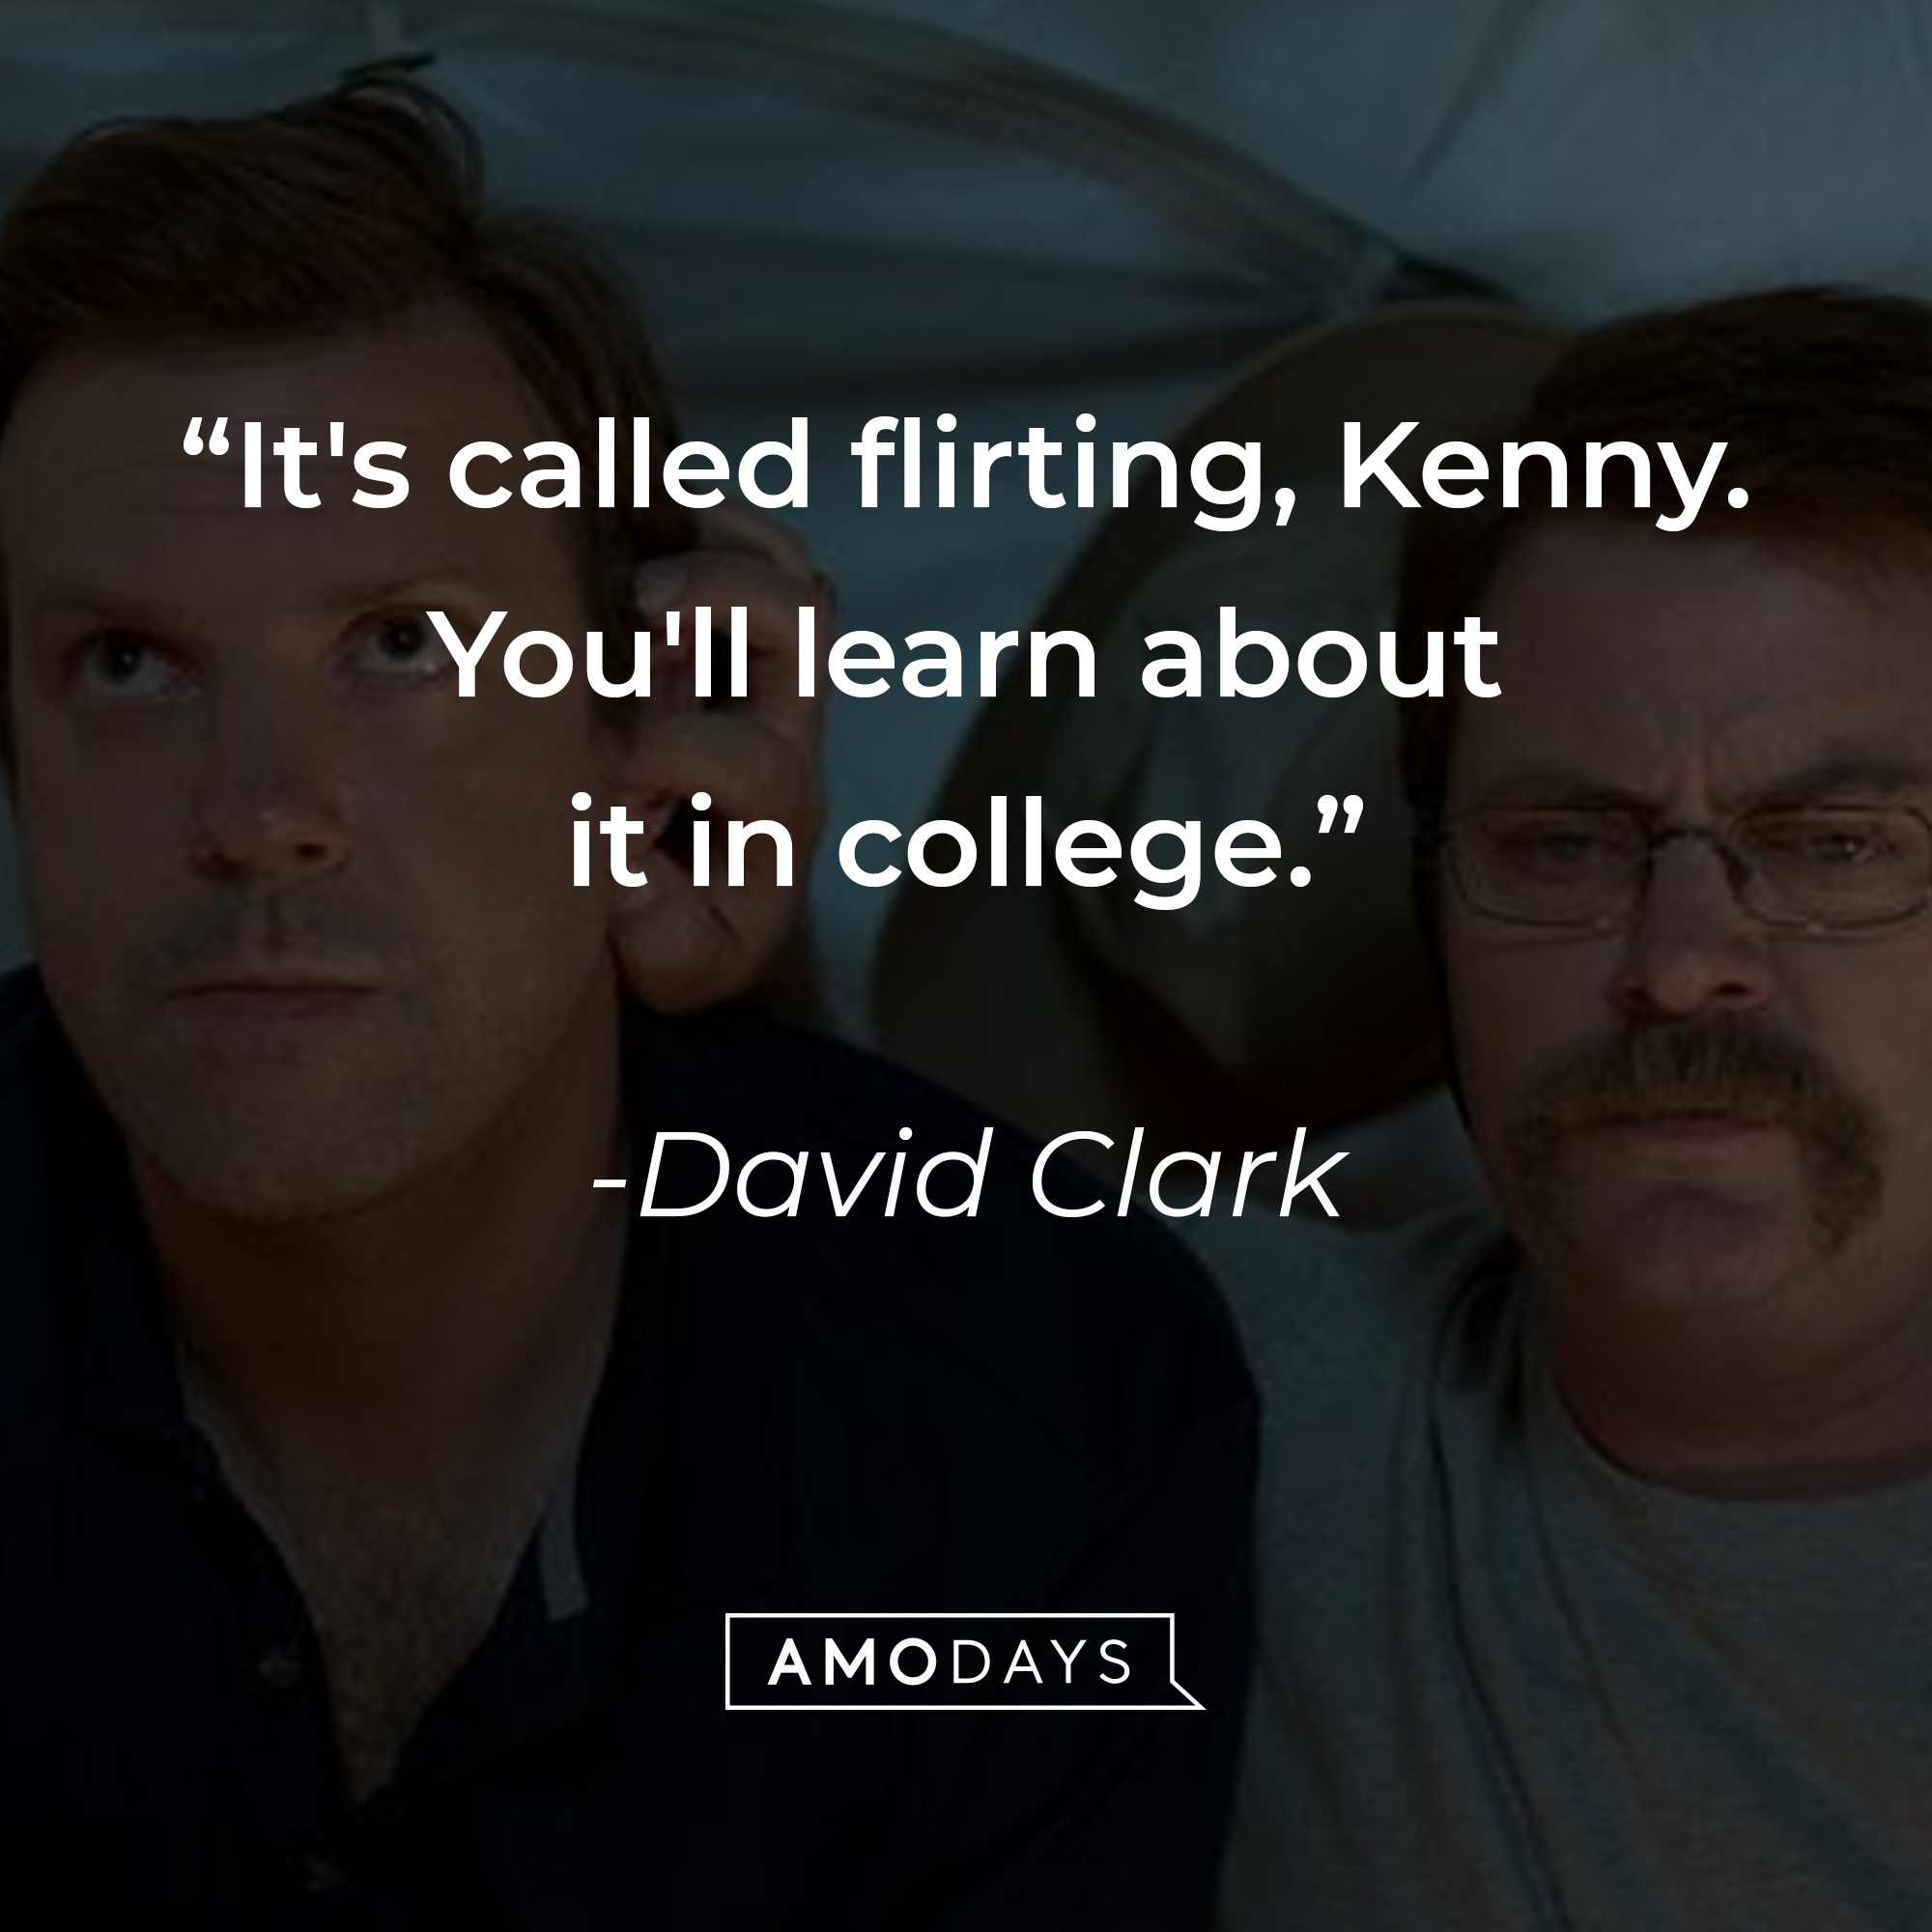 David Clark's quote: “It's called flirting, Kenny. You'll learn about it in college.” | Source: facebook.com/WereTheMillersUK